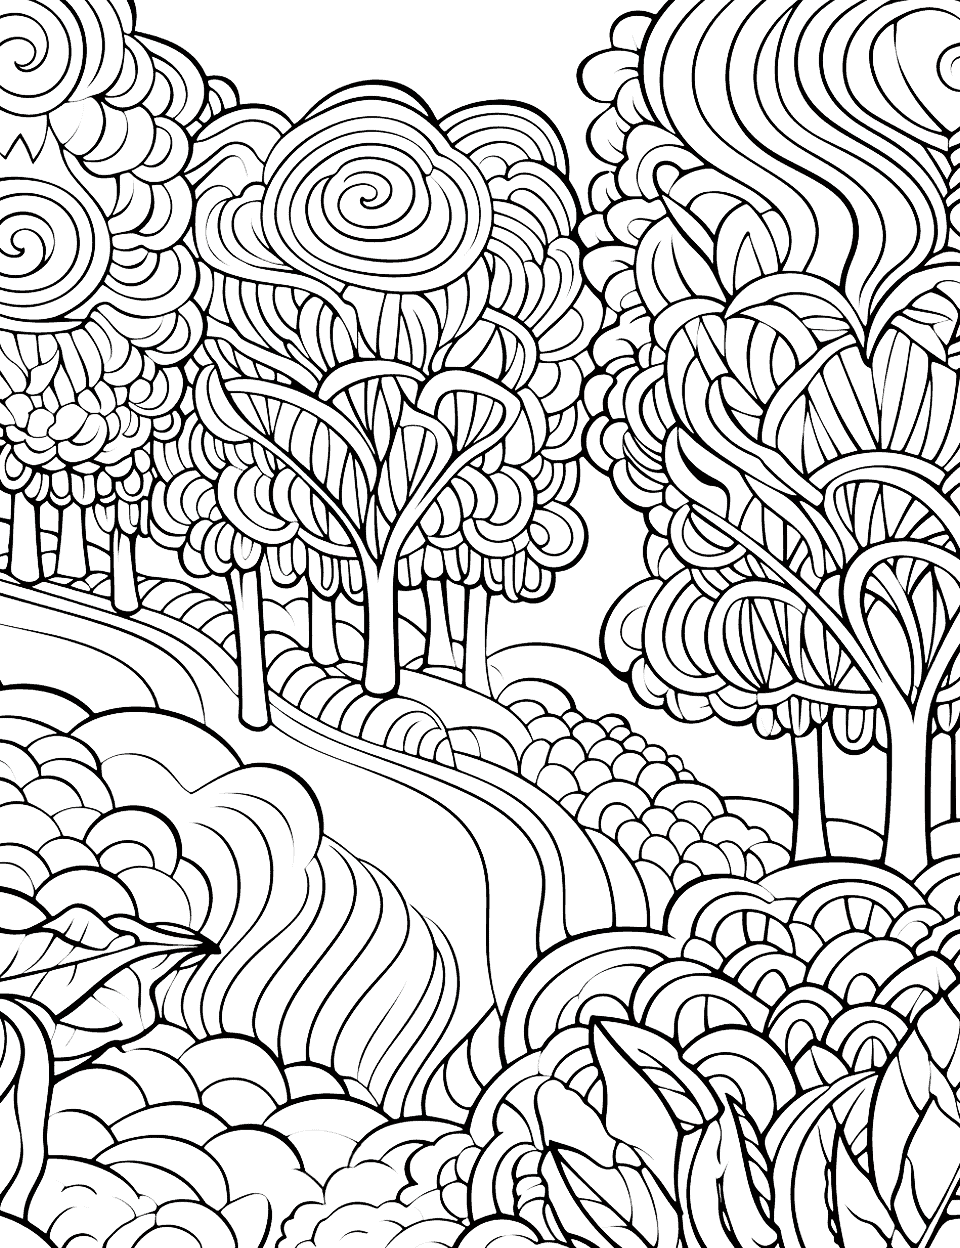 Trippy Forest Journey Adult Coloring Page - A psychedelic journey through a forest filled with abstract trees and plants.